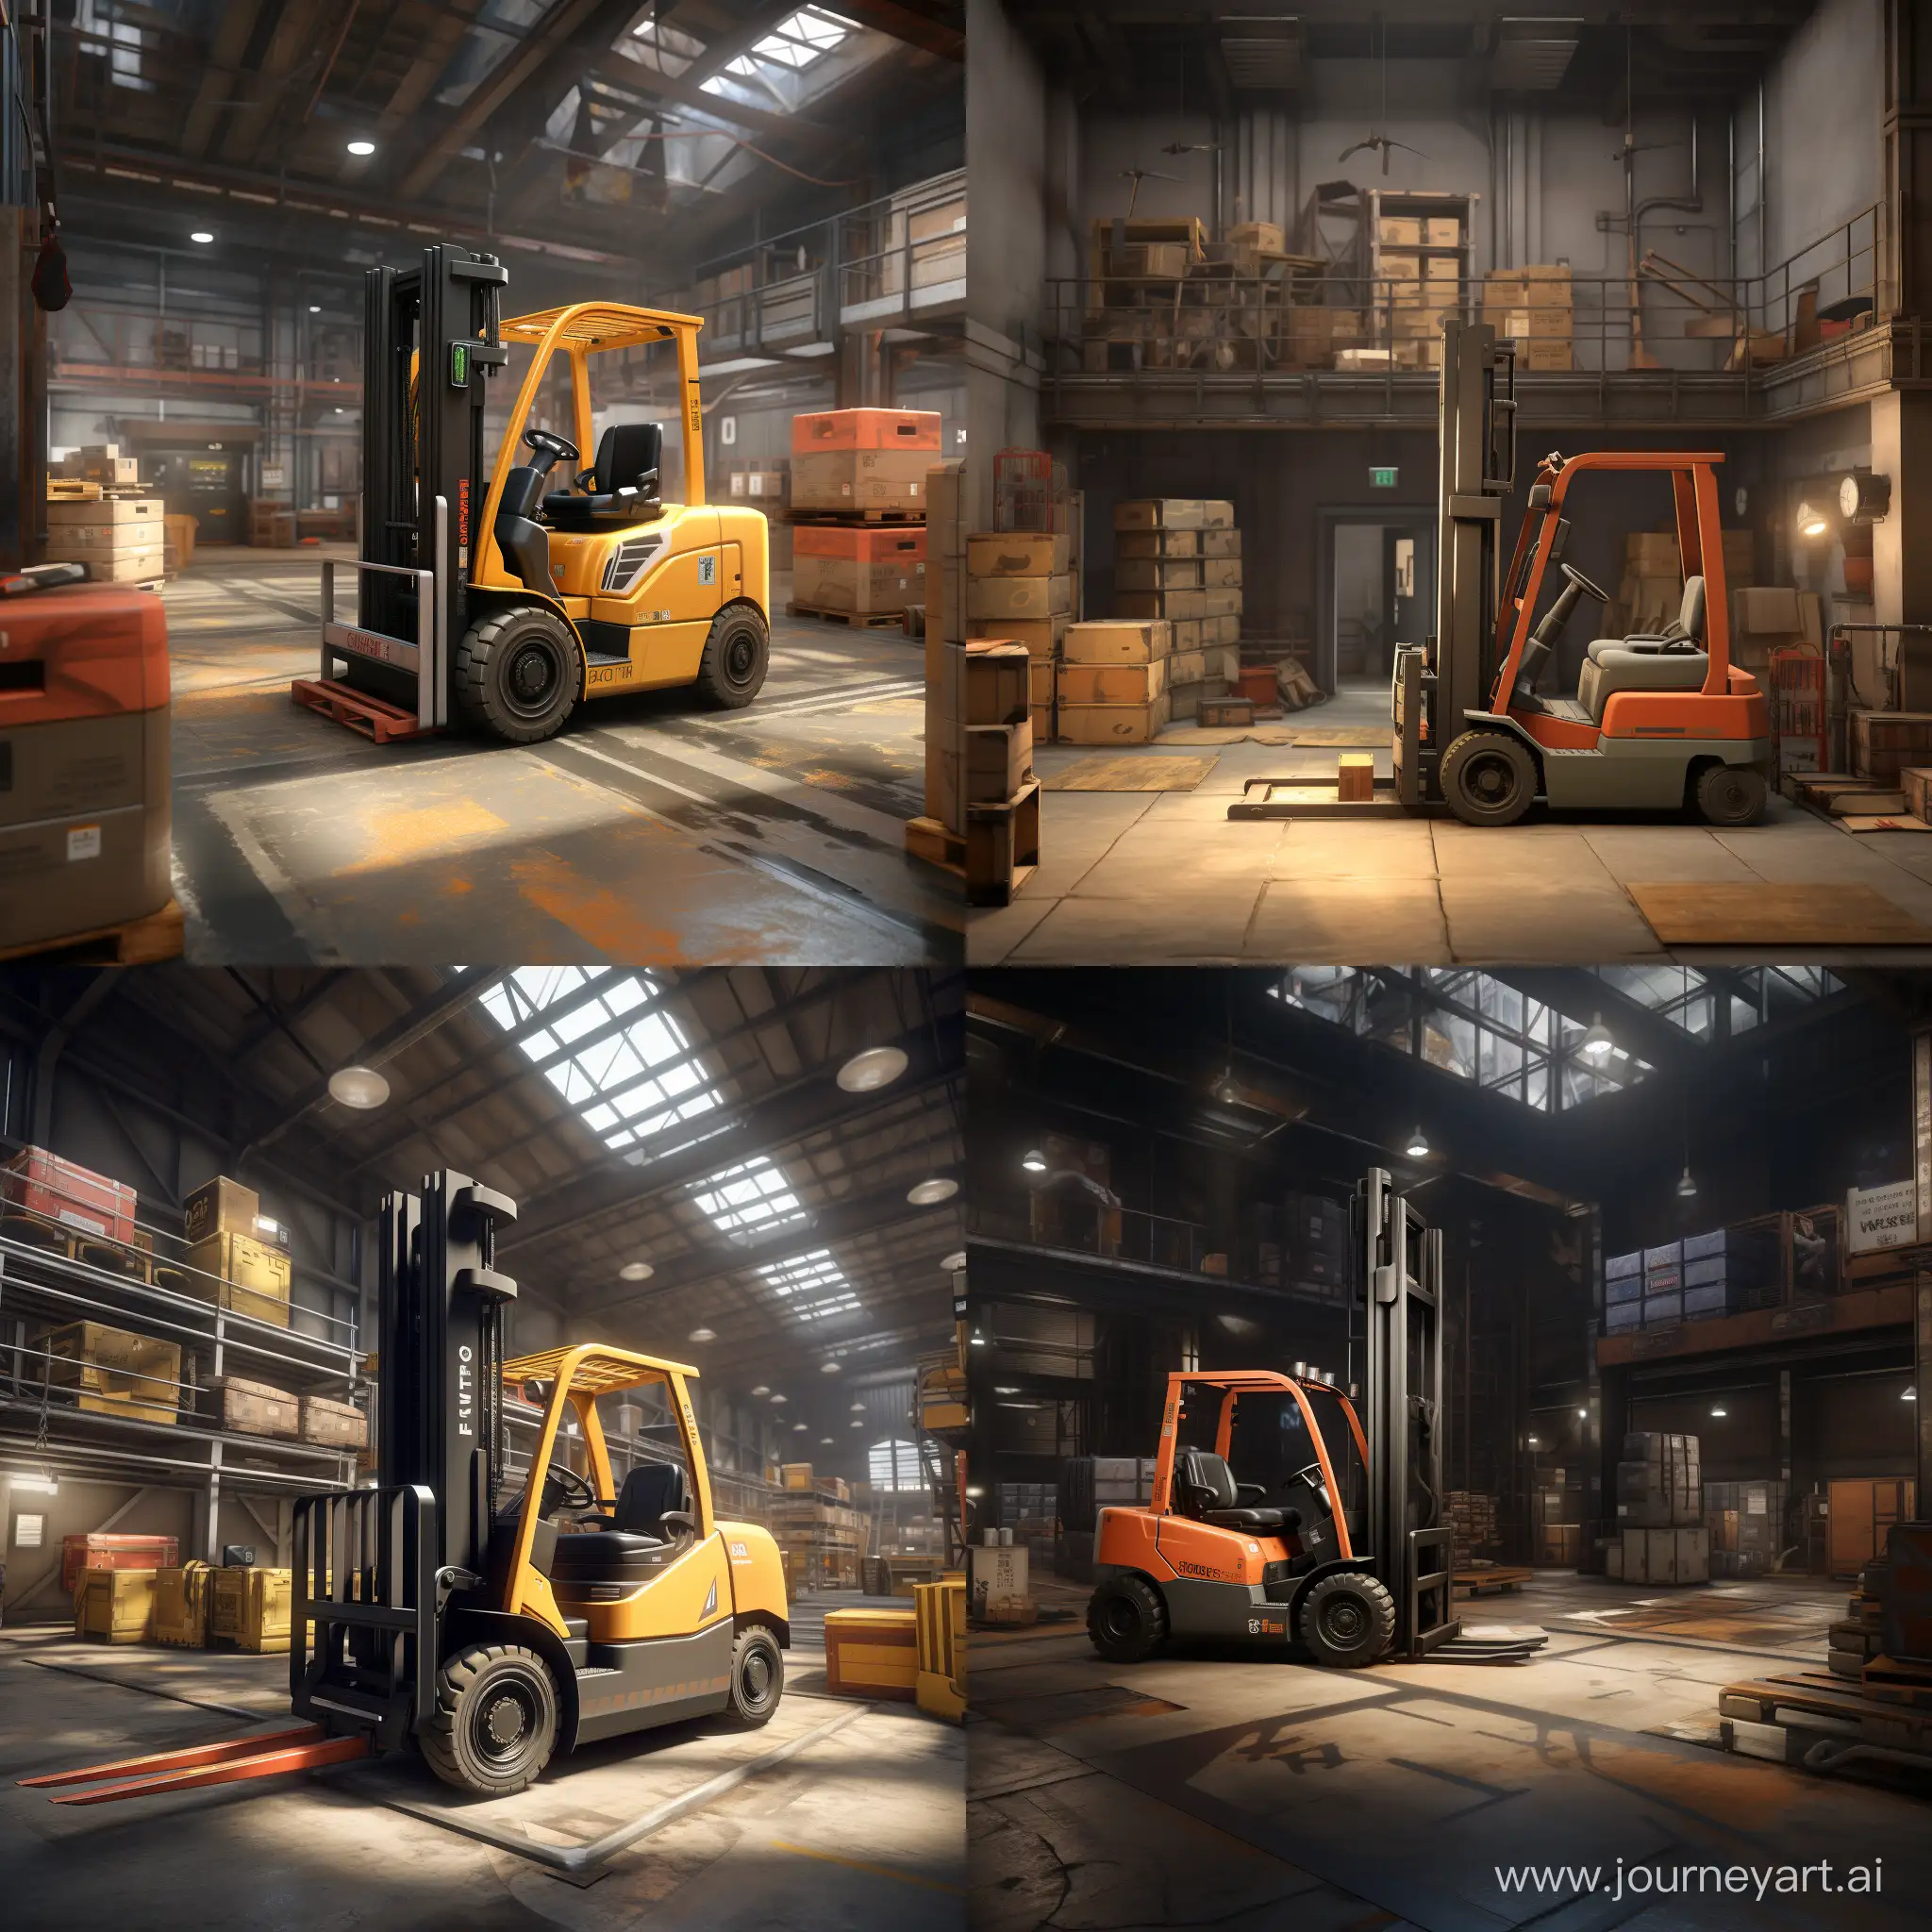 Cargo-Warehouse-Forklift-Accident-Unfortunate-Turnover-in-11-Aspect-Ratio